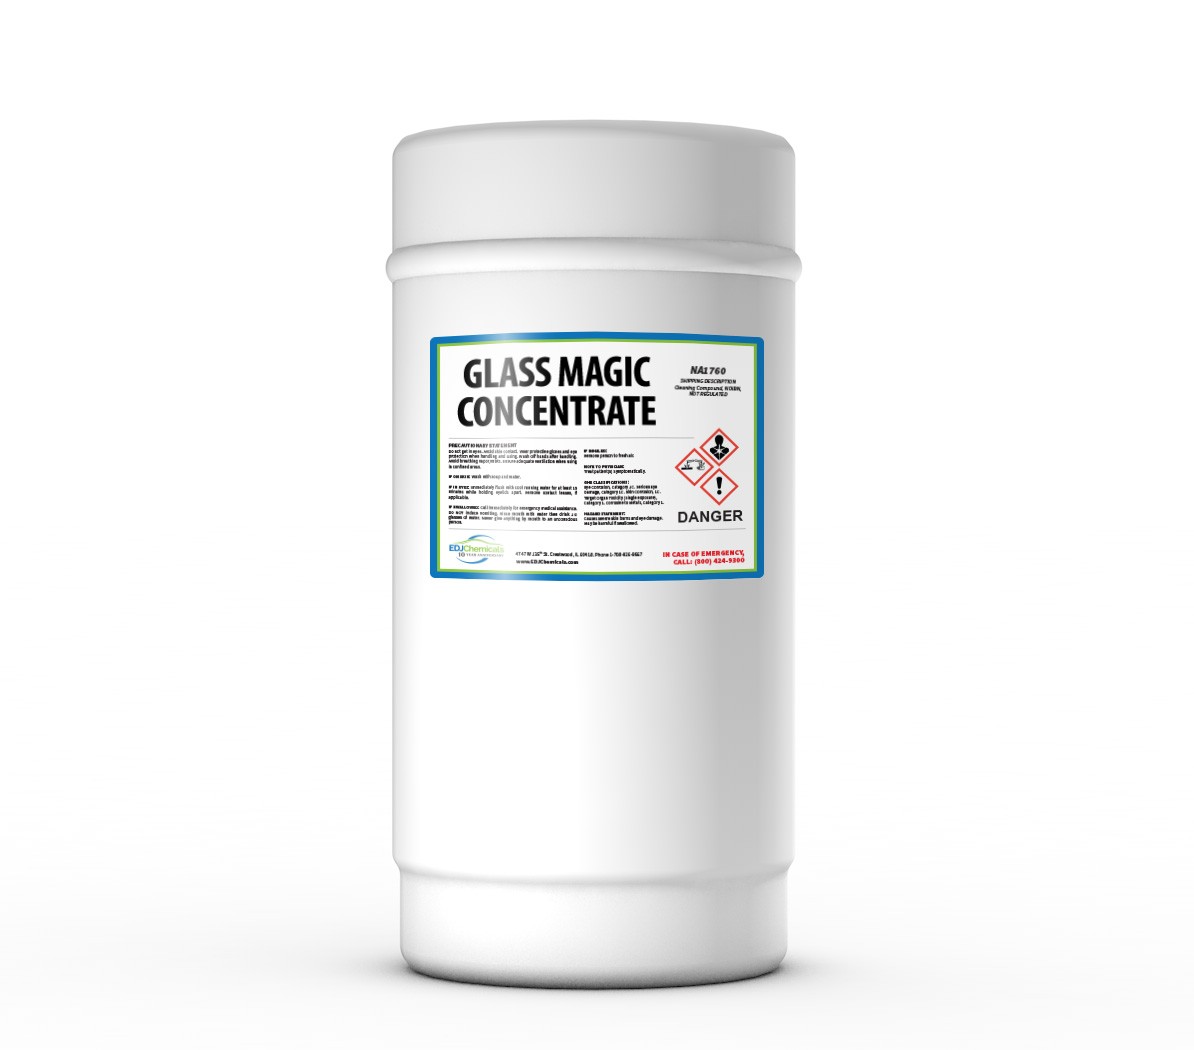 GLASS MAGIC CONCENTRATE